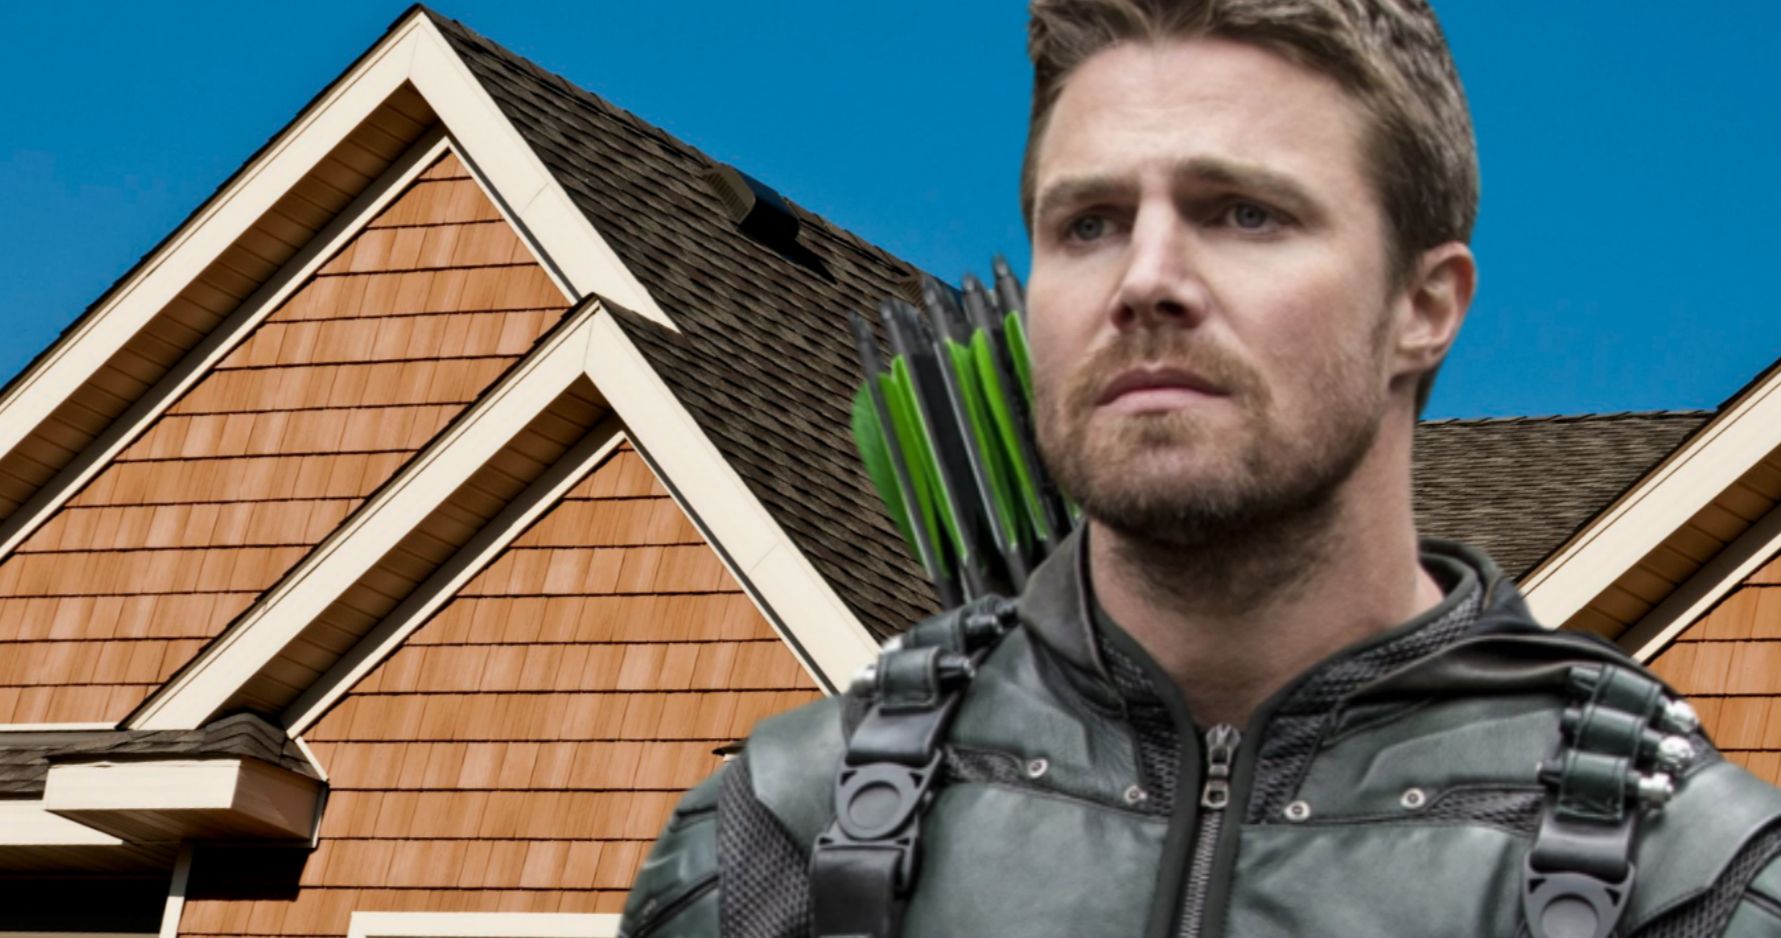 Arrow Star Stephen Amell Claims Disgruntled Neighbor Did a Number Two on His Roof